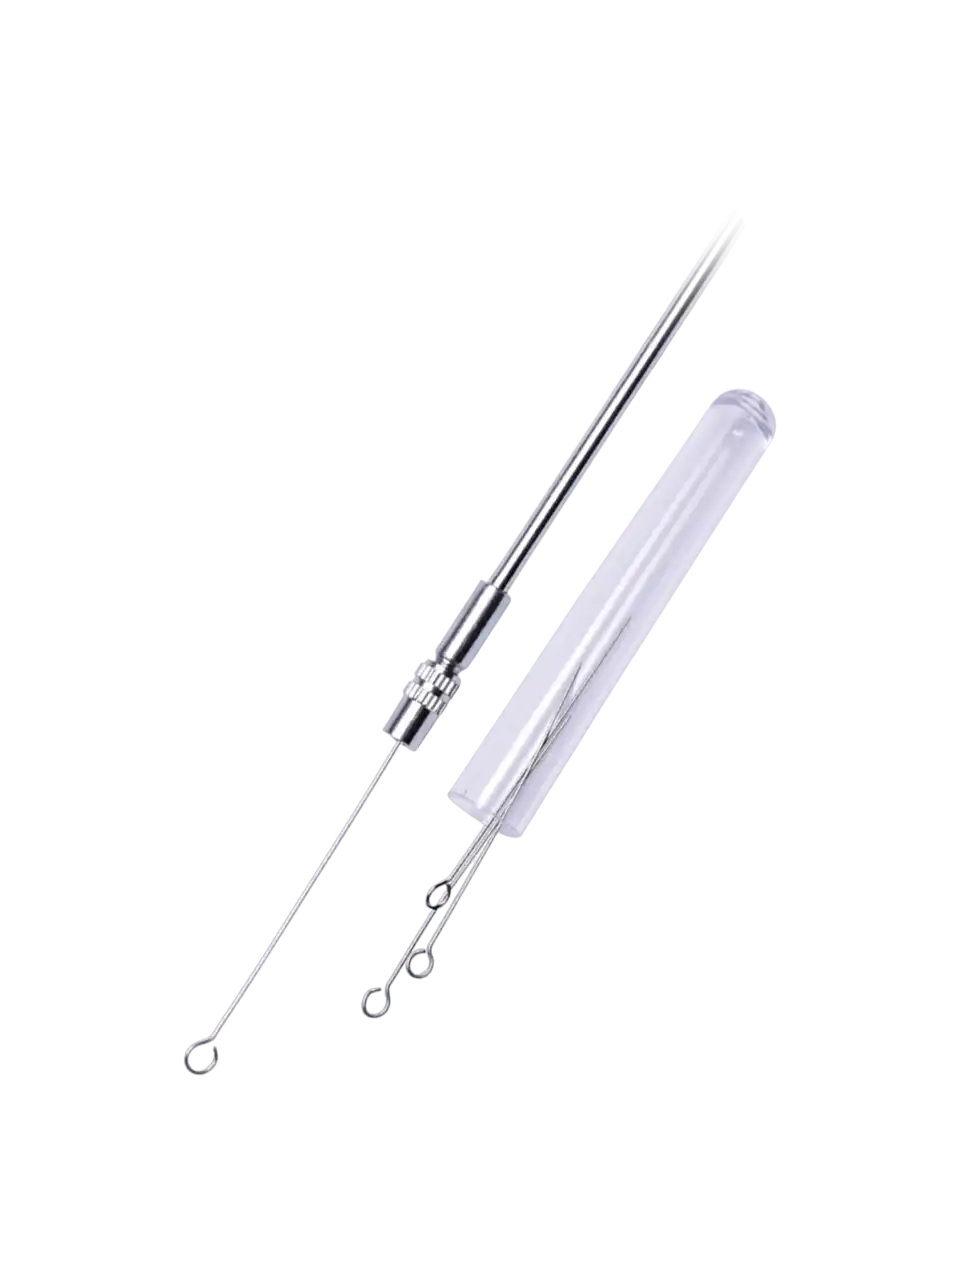 Inoculation Loop, Stainless Steel, Ring End, Thermal Resistance up to 1200°C, 50 mm Length, 10 pcs/pack